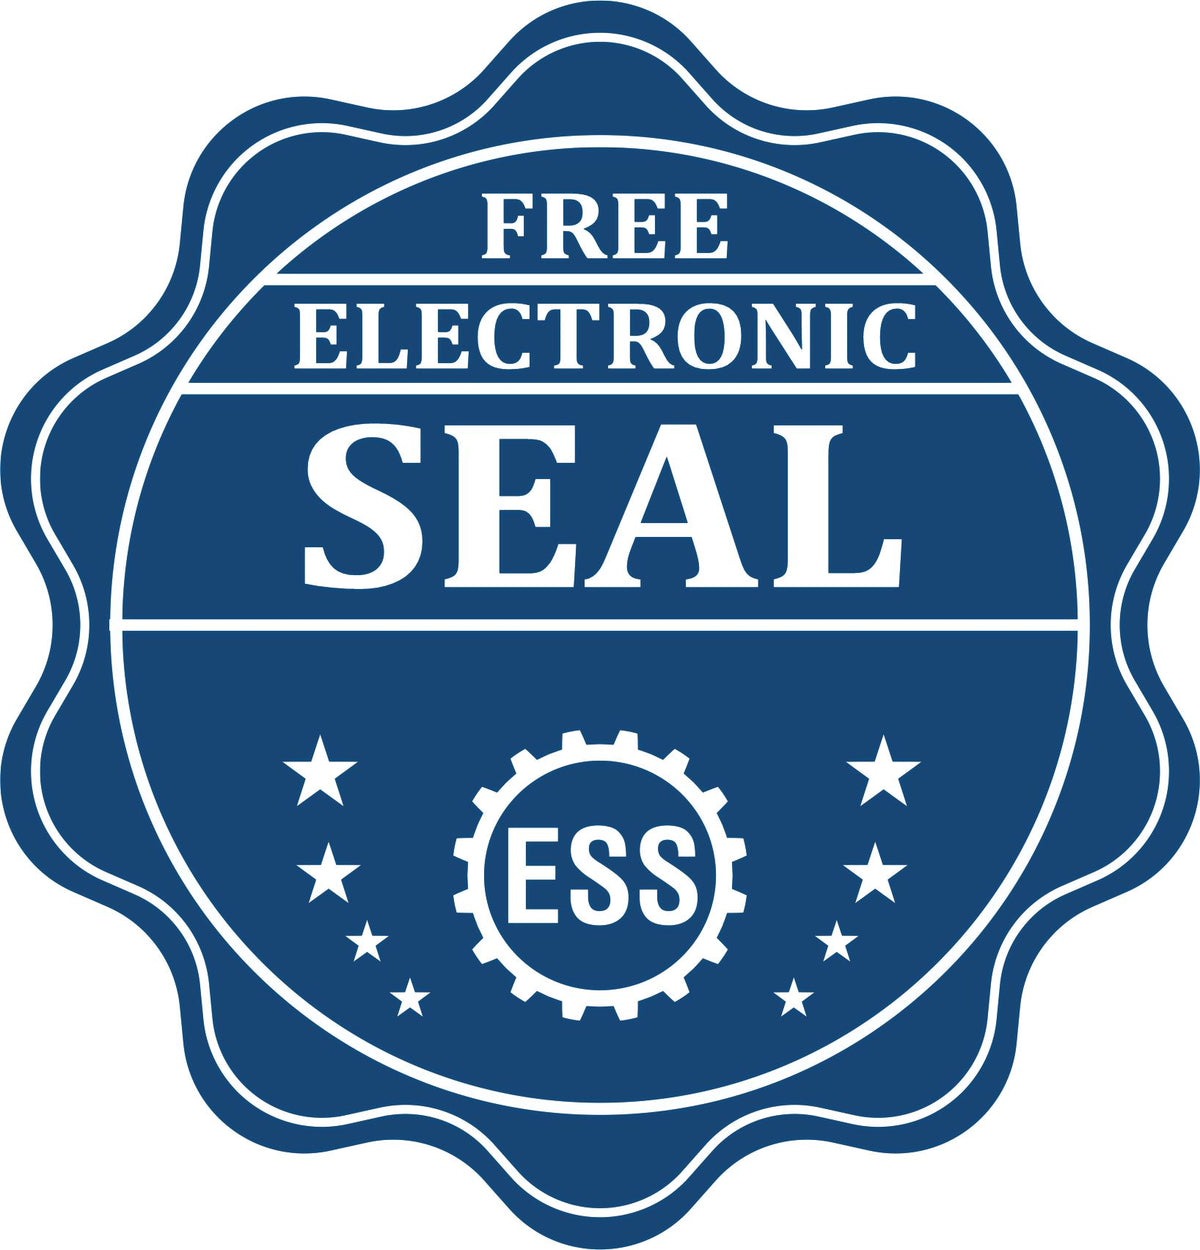 A badge showing a free electronic seal for the Heavy Duty Cast Iron Connecticut Architect Embosser with stars and the ESS gear on the emblem.